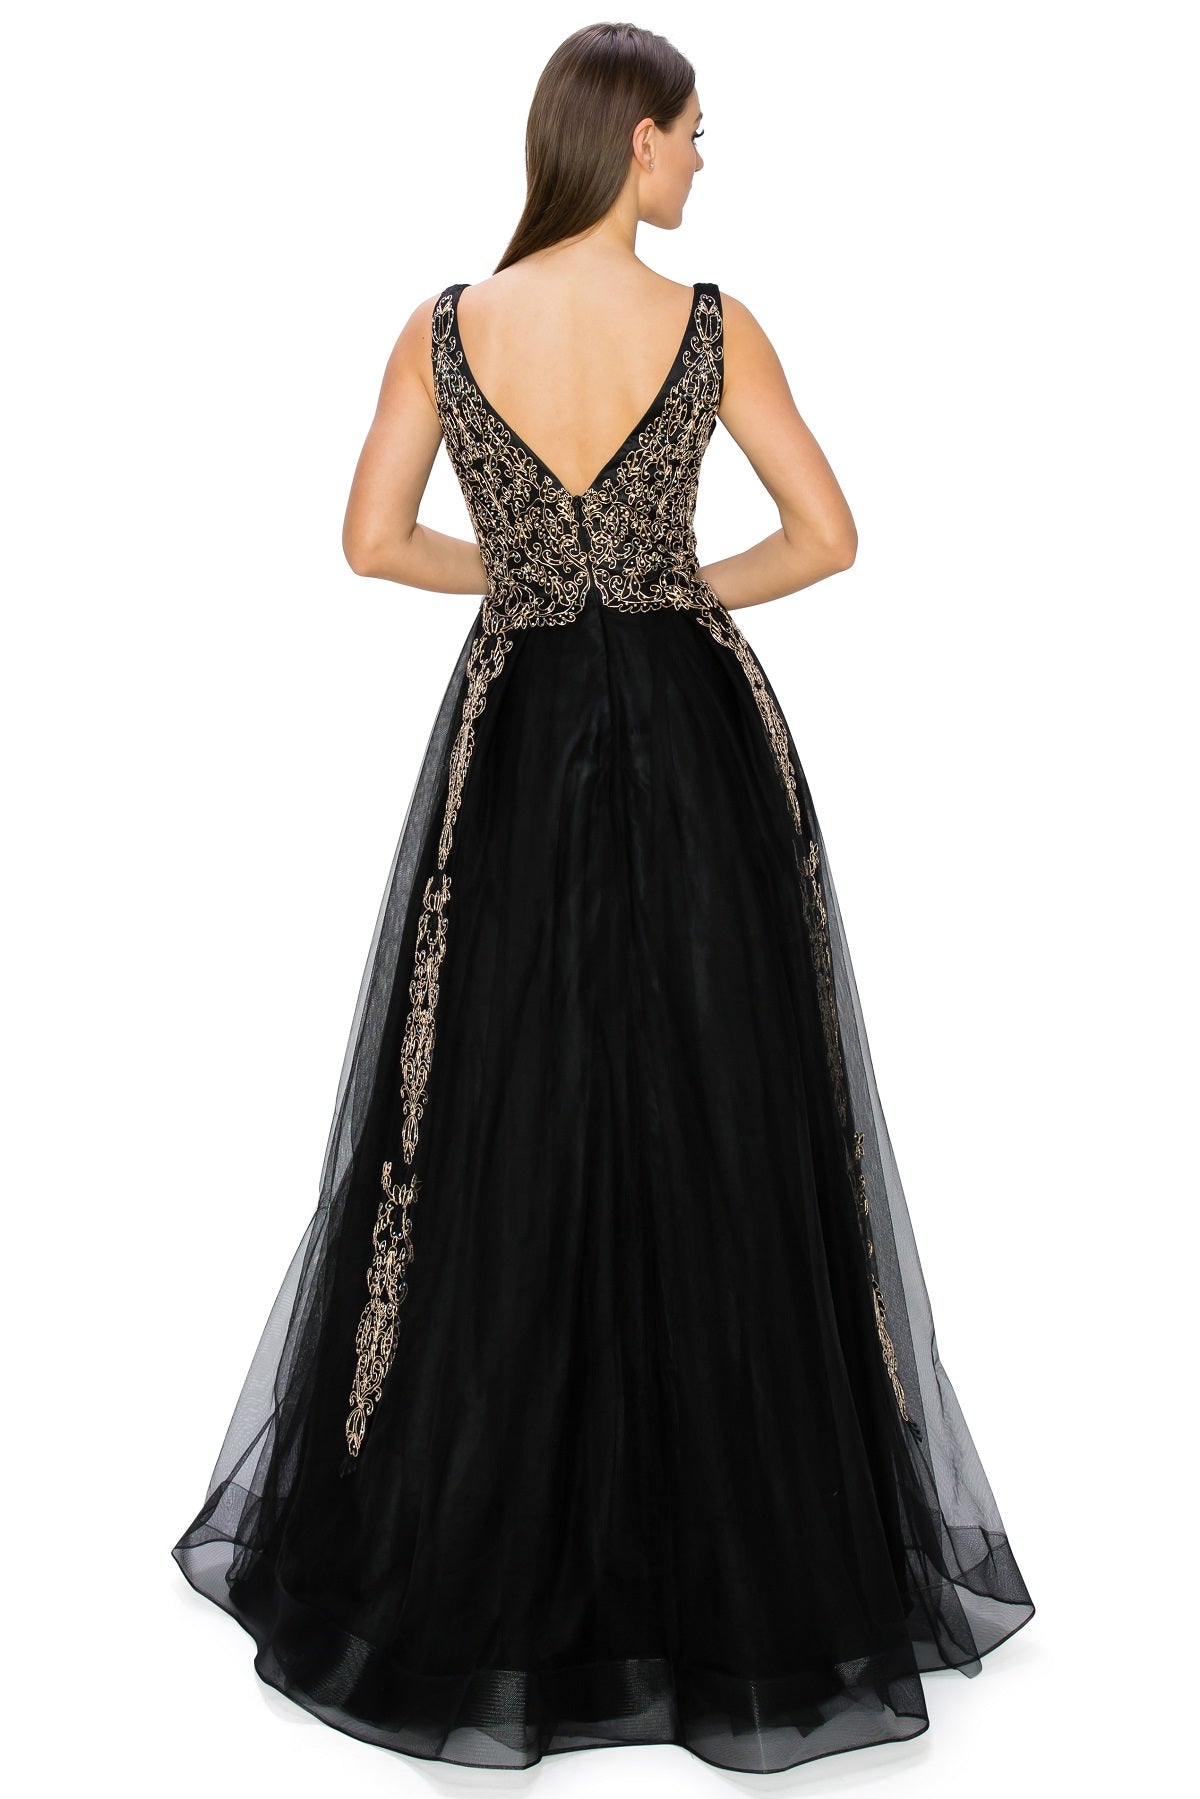 Black Glitter Floral Lace Tulle Gown by Cinderella Couture USA AS8029J-BLK - Special Occasion/Curves